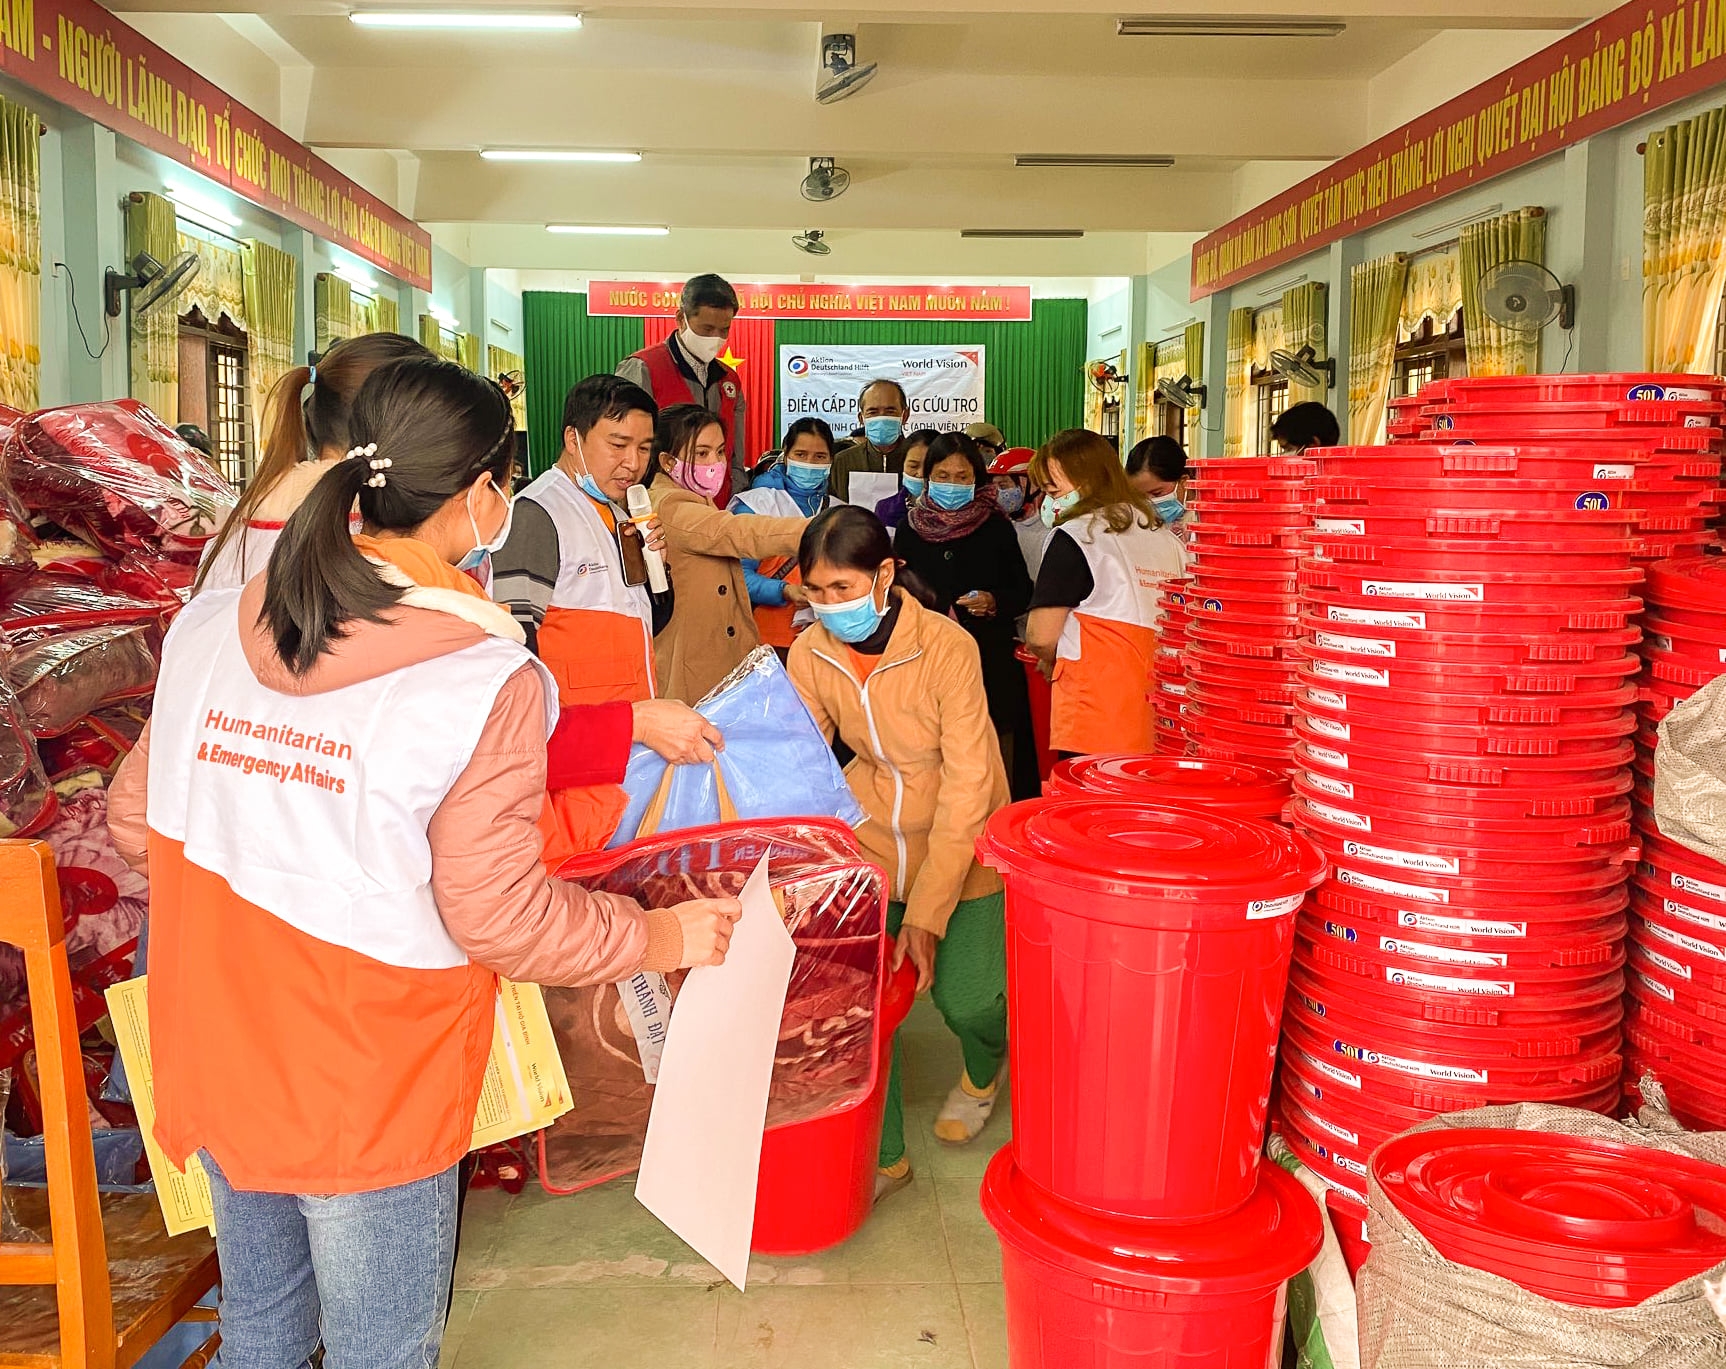 World Vision distributes essential goods to Quang Ngai's households